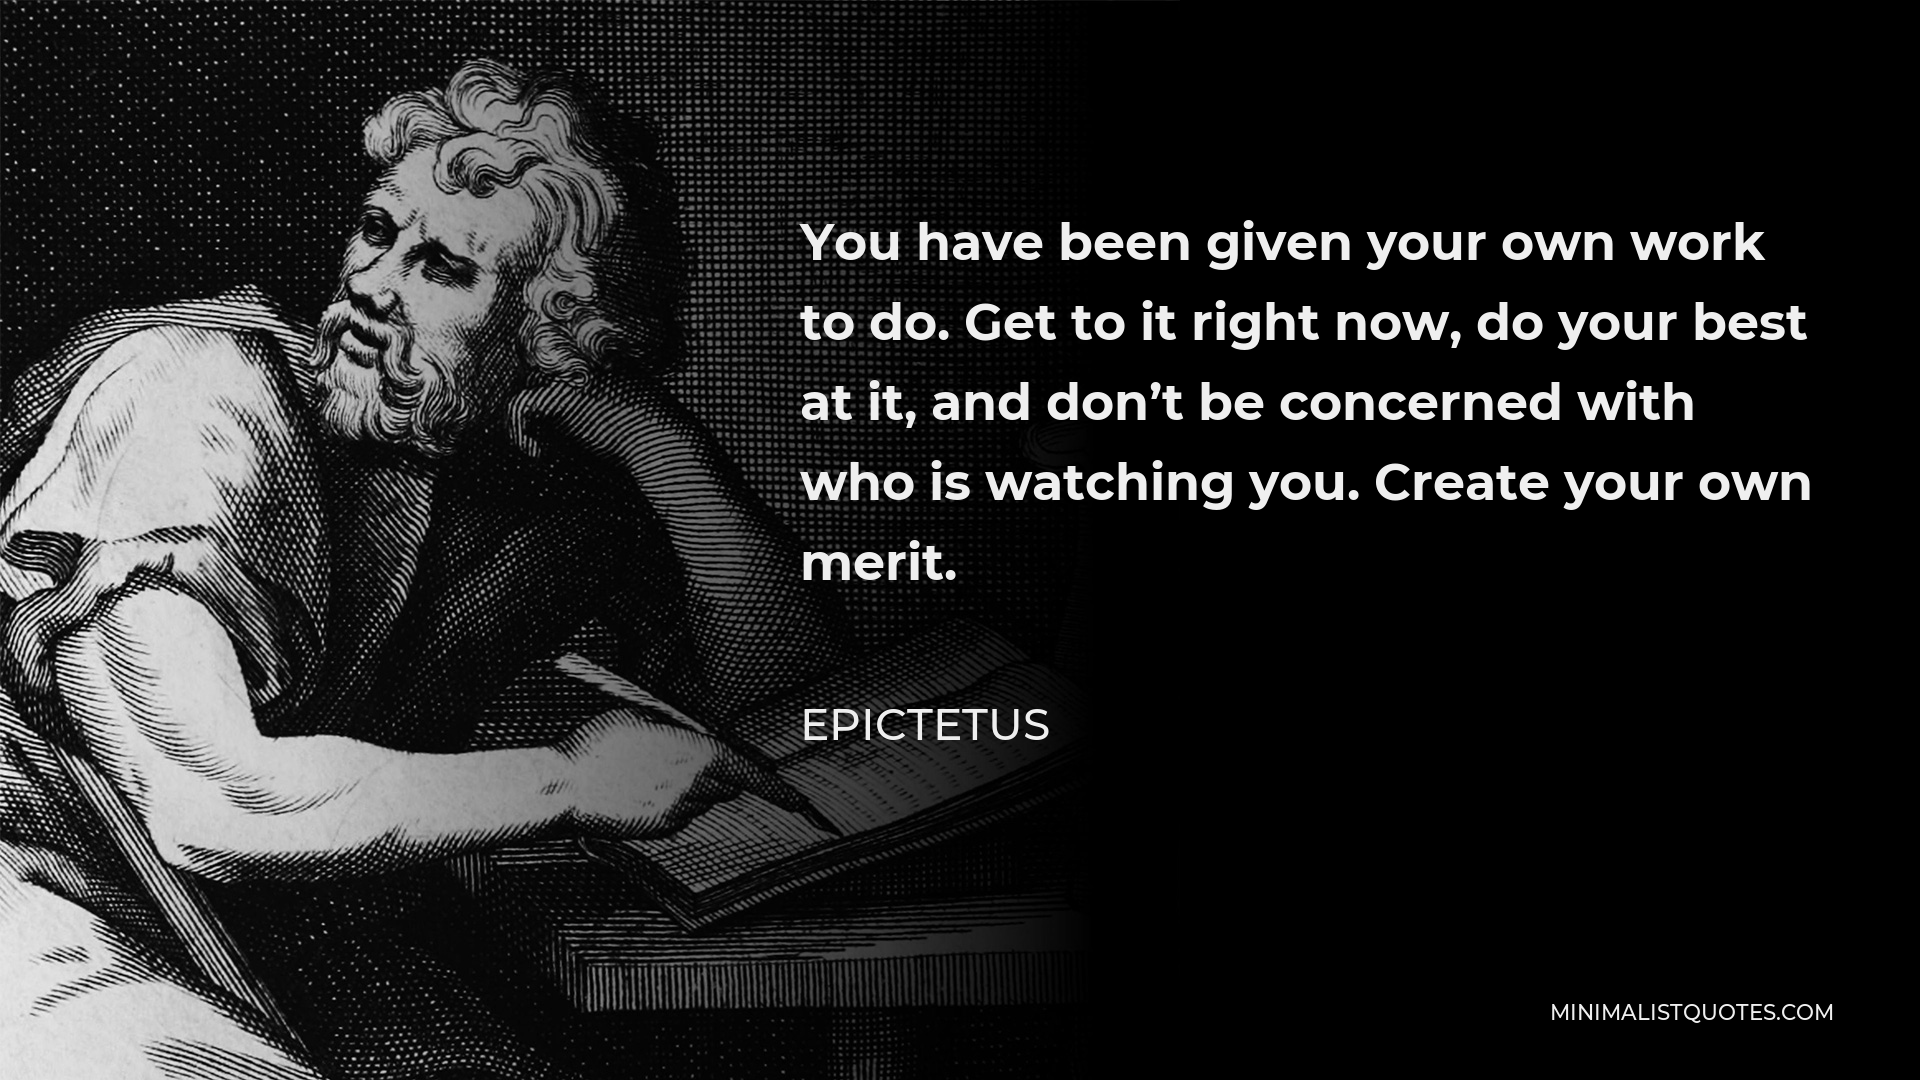 Epictetus Quote - You have been given your own work to do. Get to it right now, do your best at it, and don’t be concerned with who is watching you. Create your own merit.